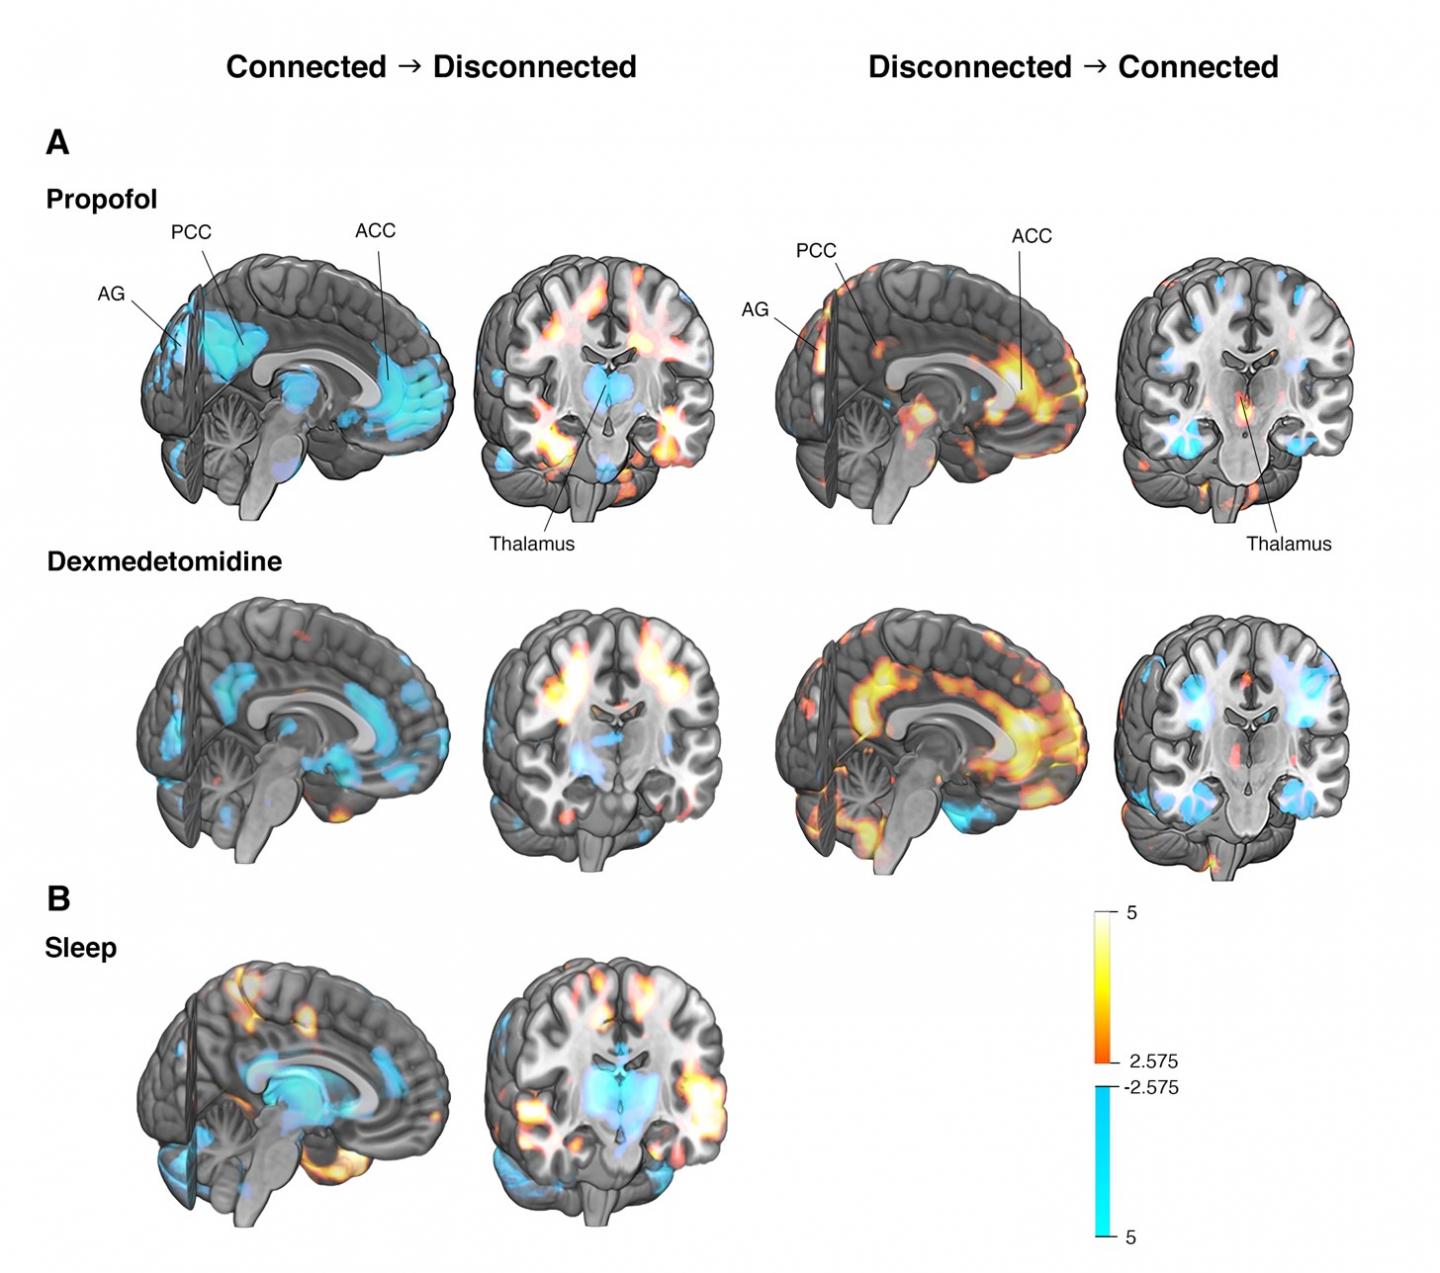 Differences in brain activity